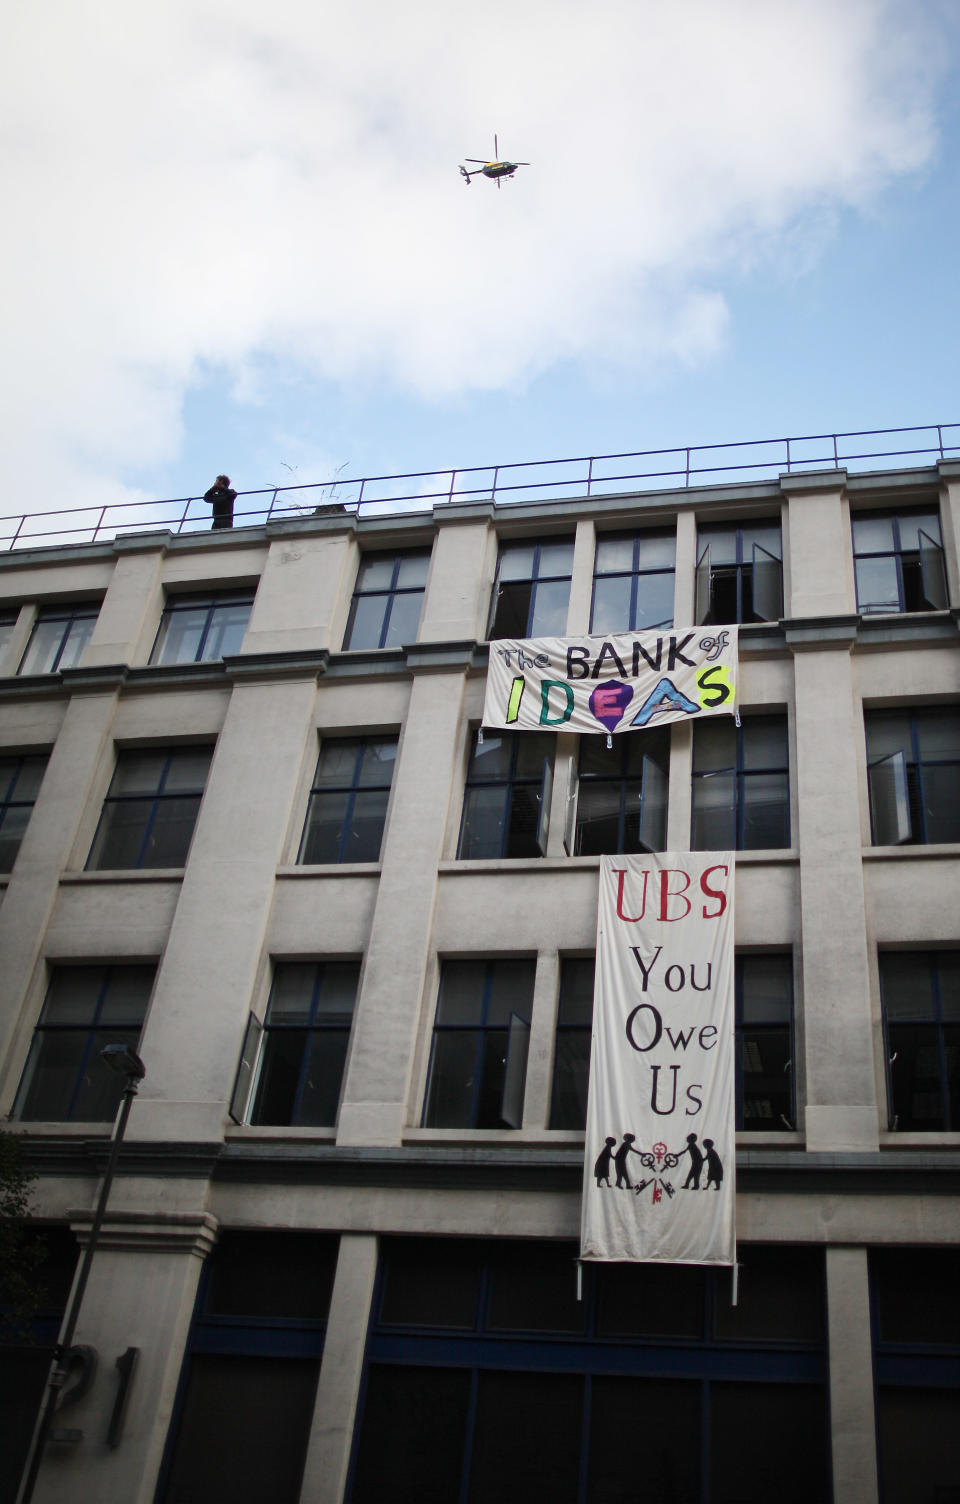 Protestors Occupy An Empty Office Block Owned By UBS